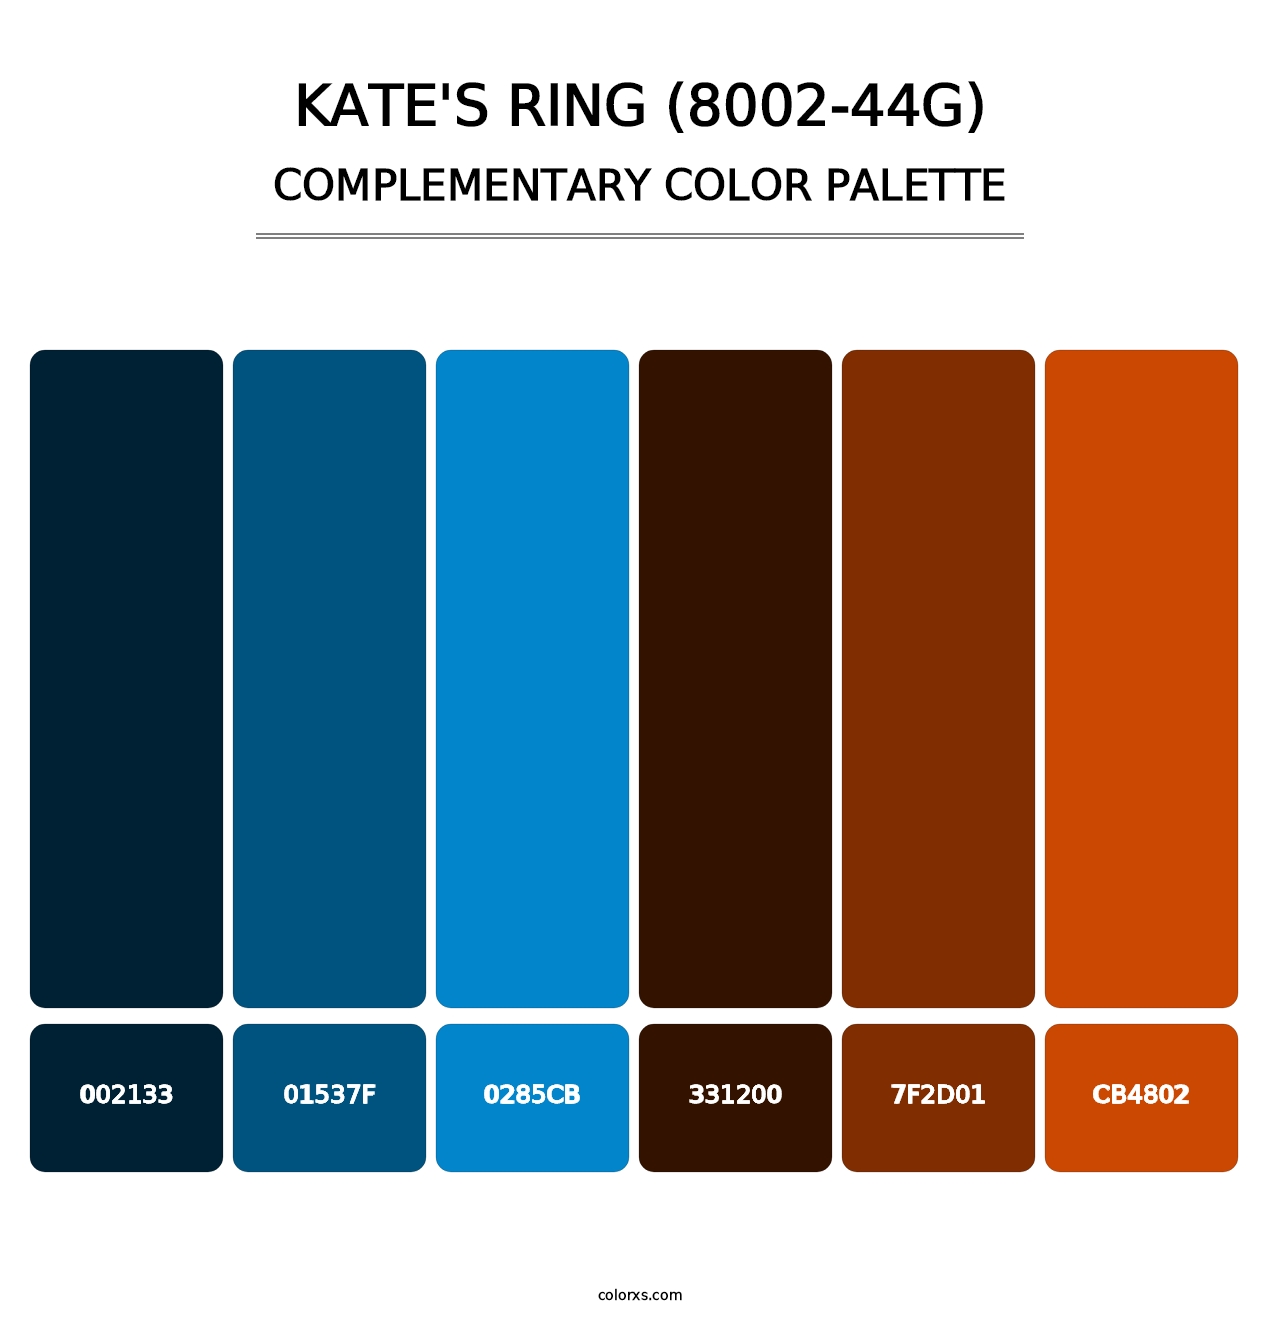 Kate's Ring (8002-44G) - Complementary Color Palette